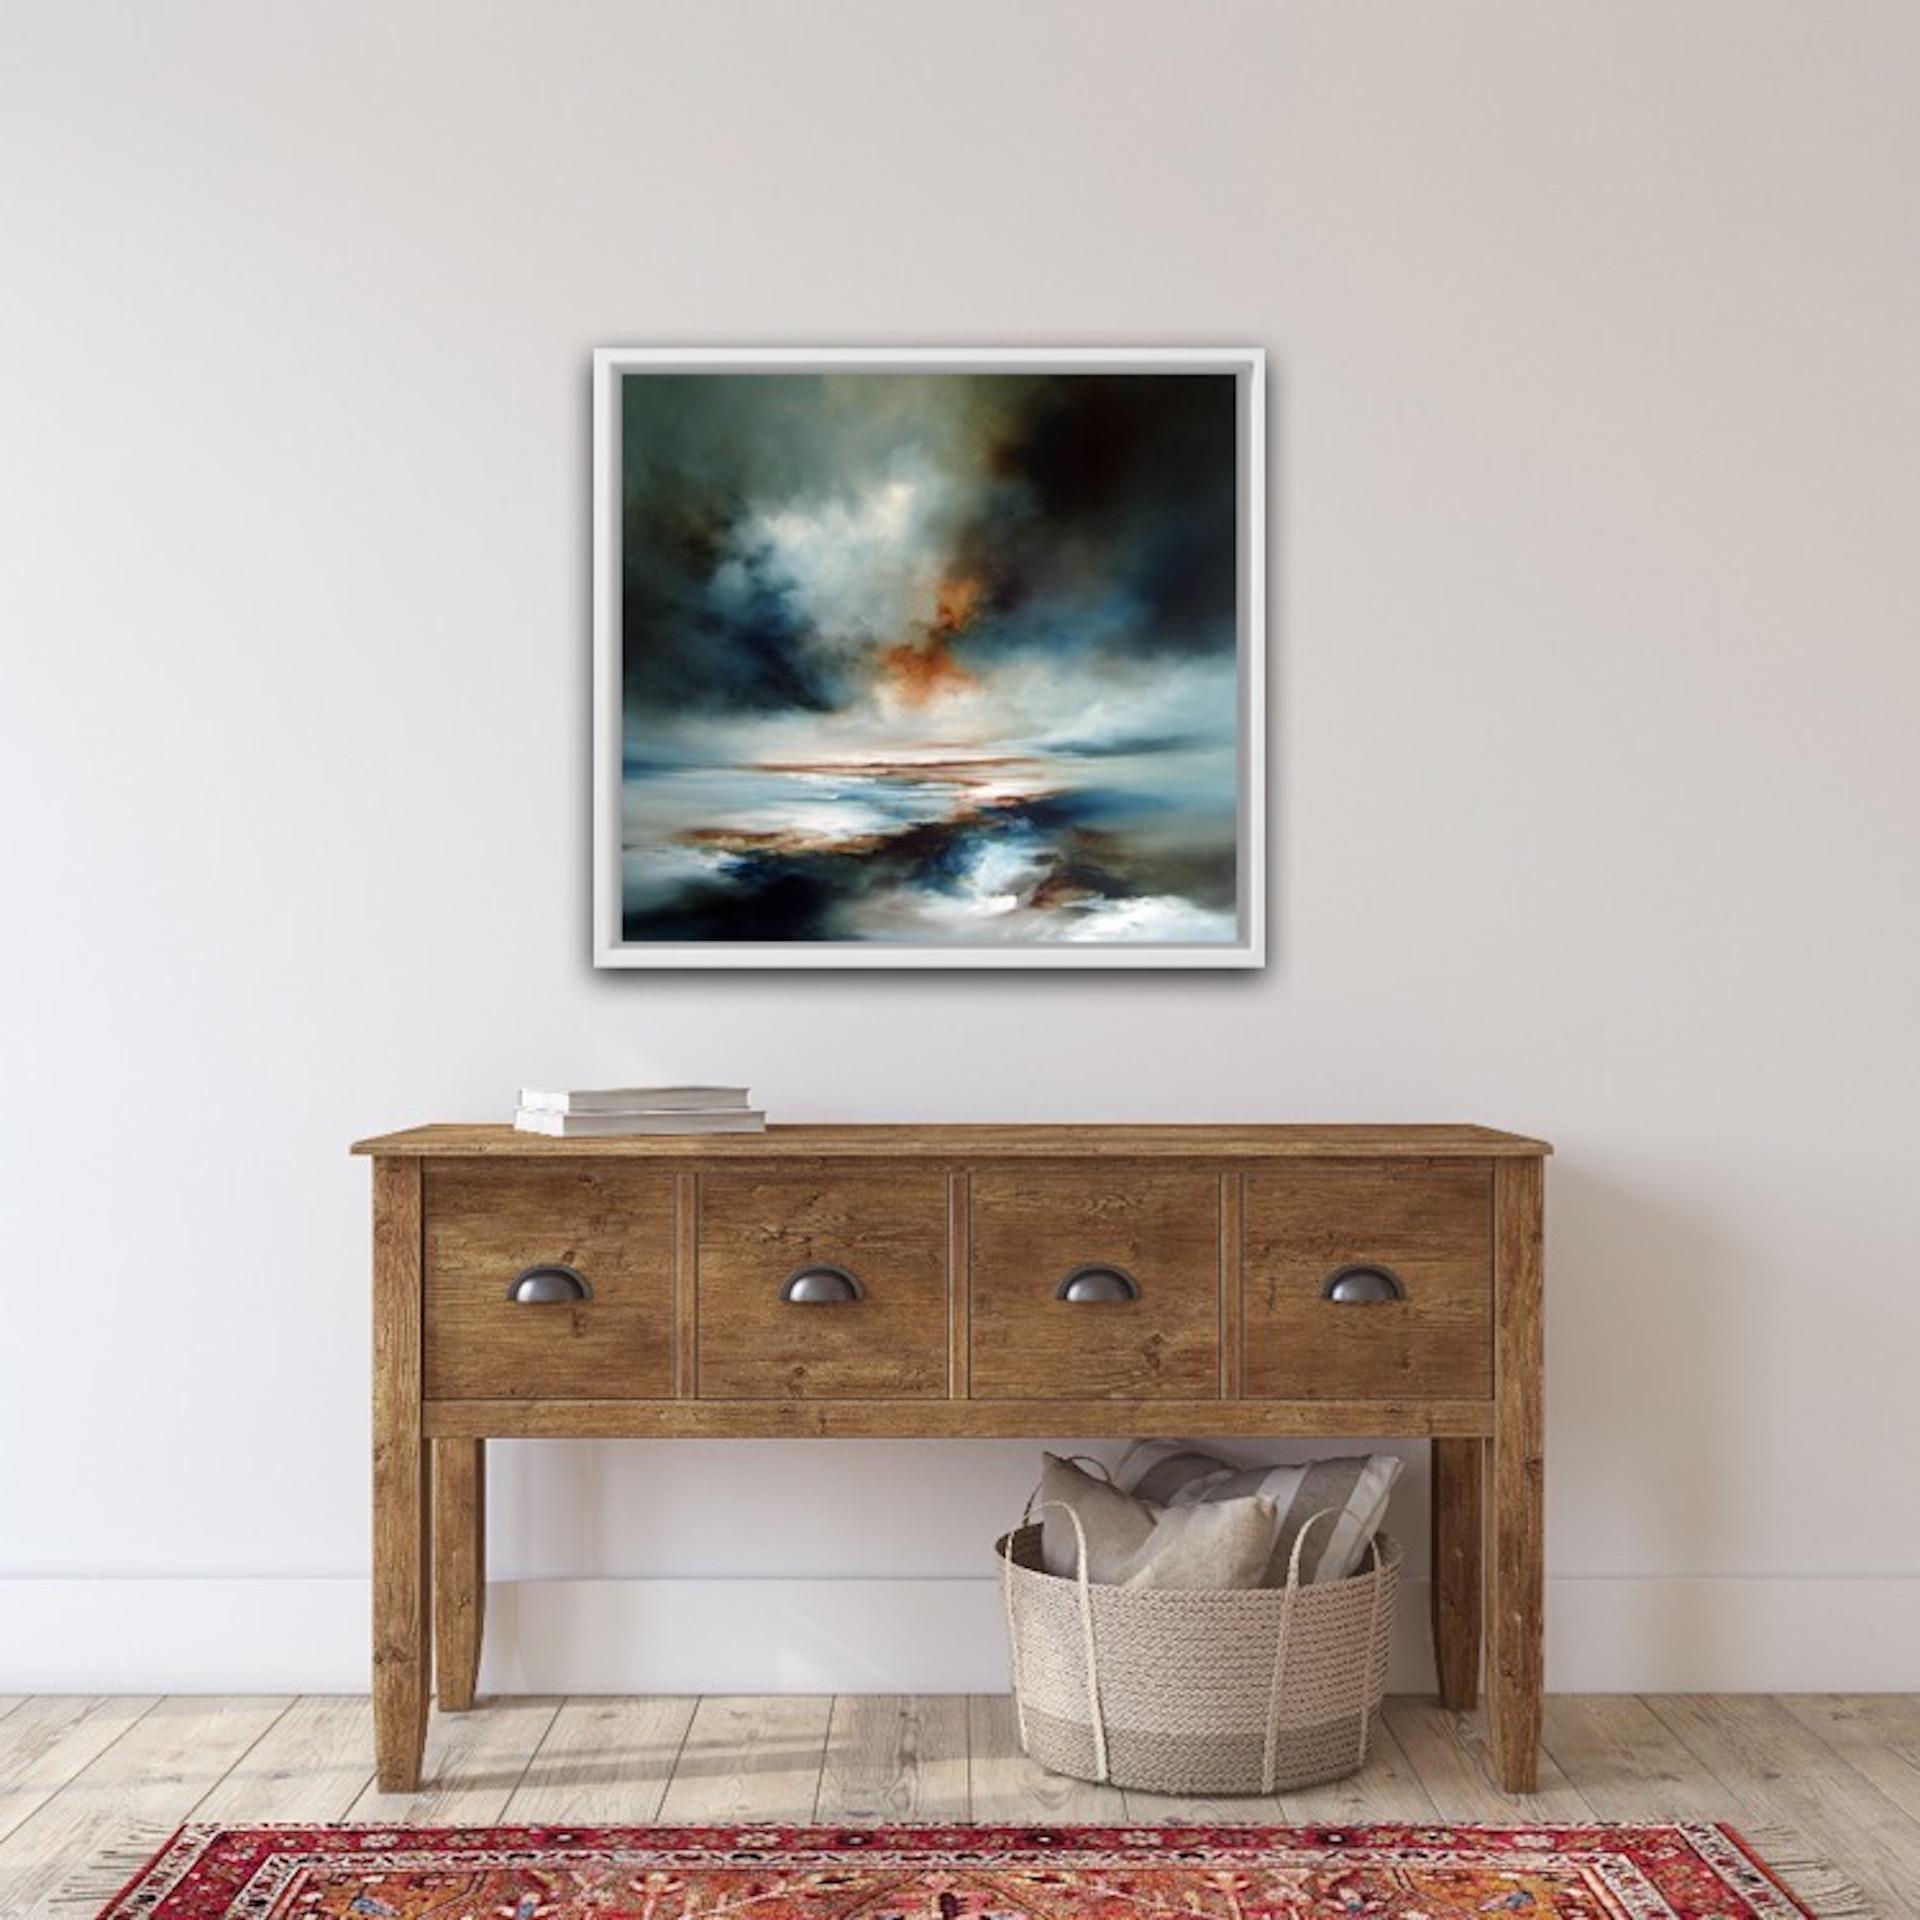 Alison Johnson
The Drama of It
Original Seascape Painting
Oil on Canvas
Canvas Size: H 60cm x W 60cm x D 3cm
Sold Unframed
Please note that in situ images are purely an indication of how a piece may look.

The Drama of It is an original painting by